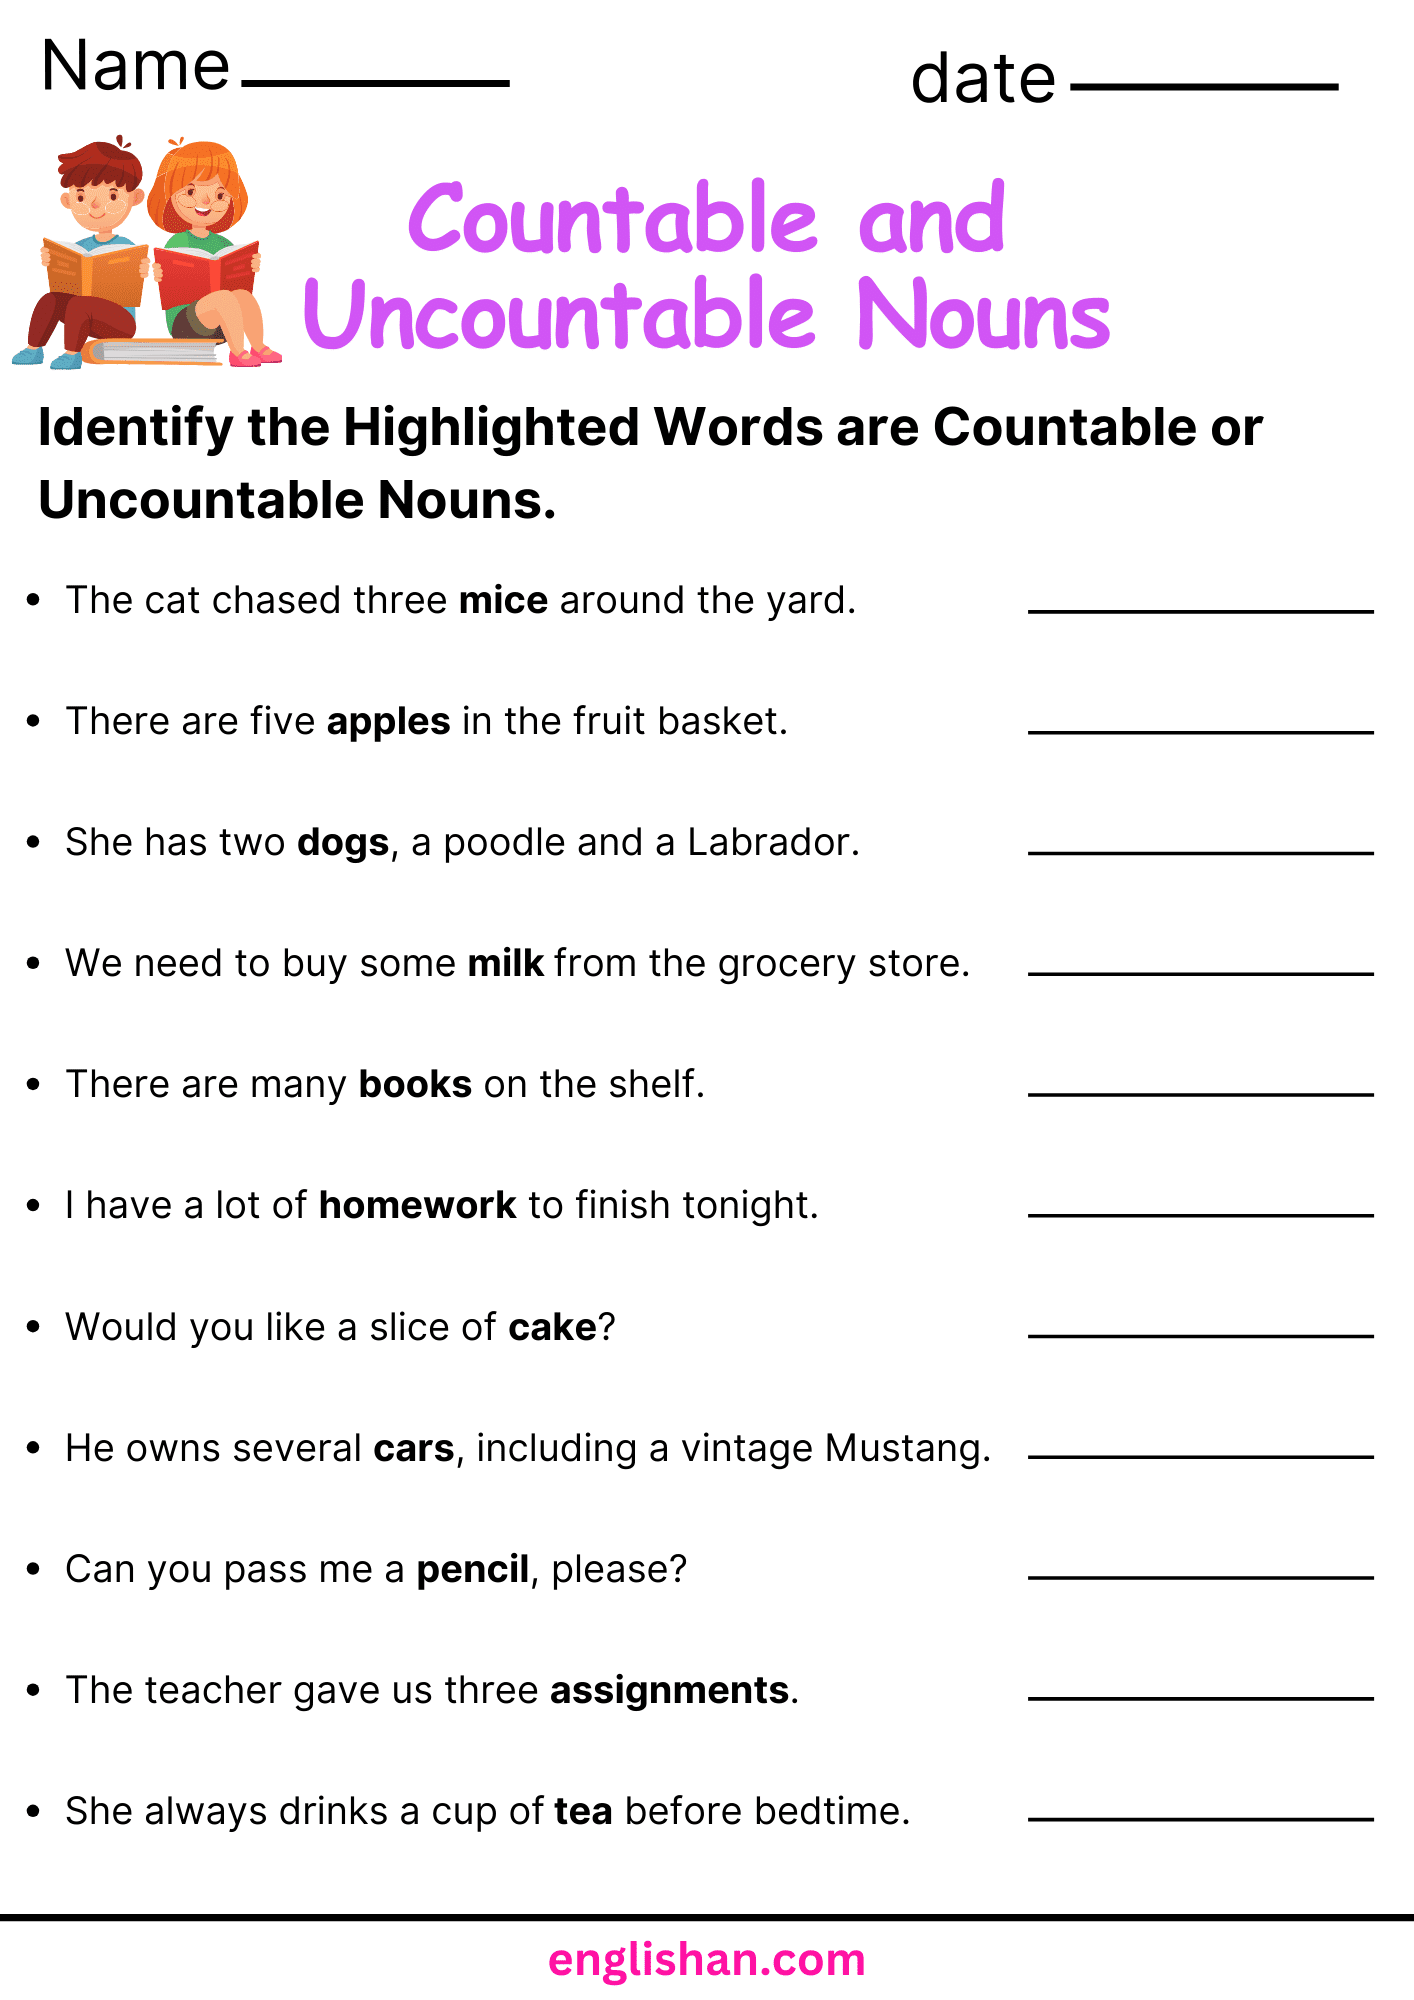 Countable and Uncountable Nouns Worksheet and Exercises. Identify Highlighted Words are Countable or Uncountable Nouns